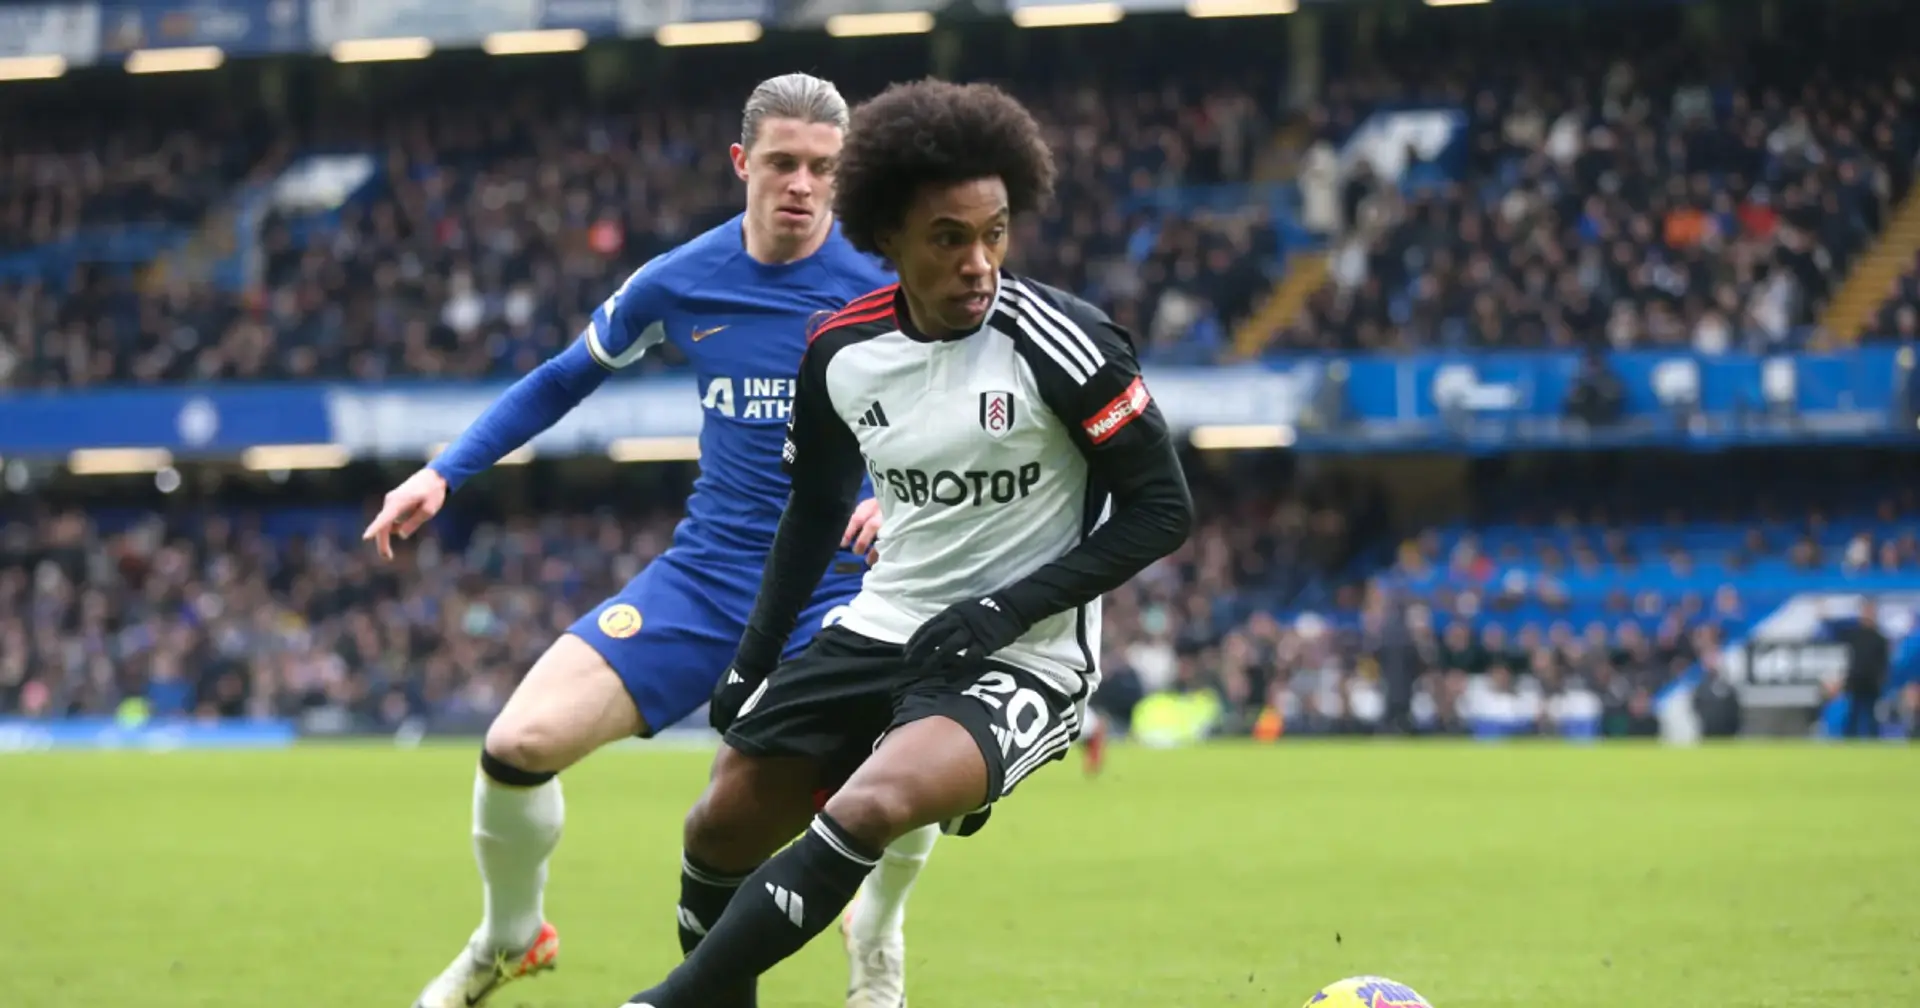 'You were always amazing': Willian sends message to Chelsea fans after Stamford Bridge reception